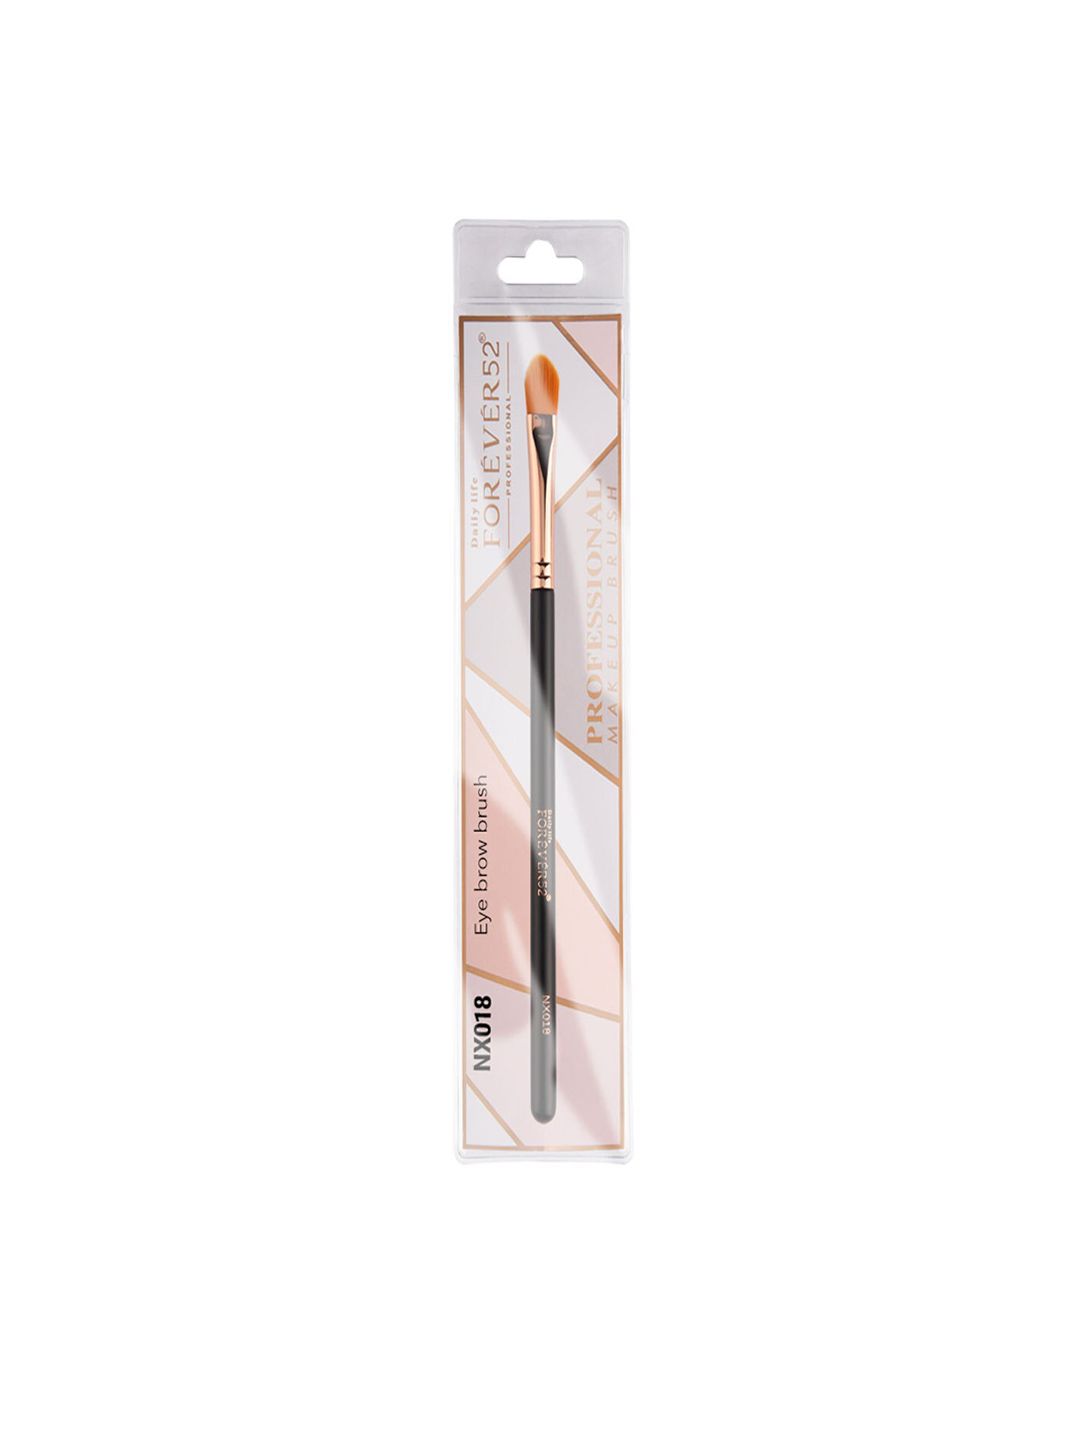 Daily Life Forever52 Eye shadow brush NX018 Price in India